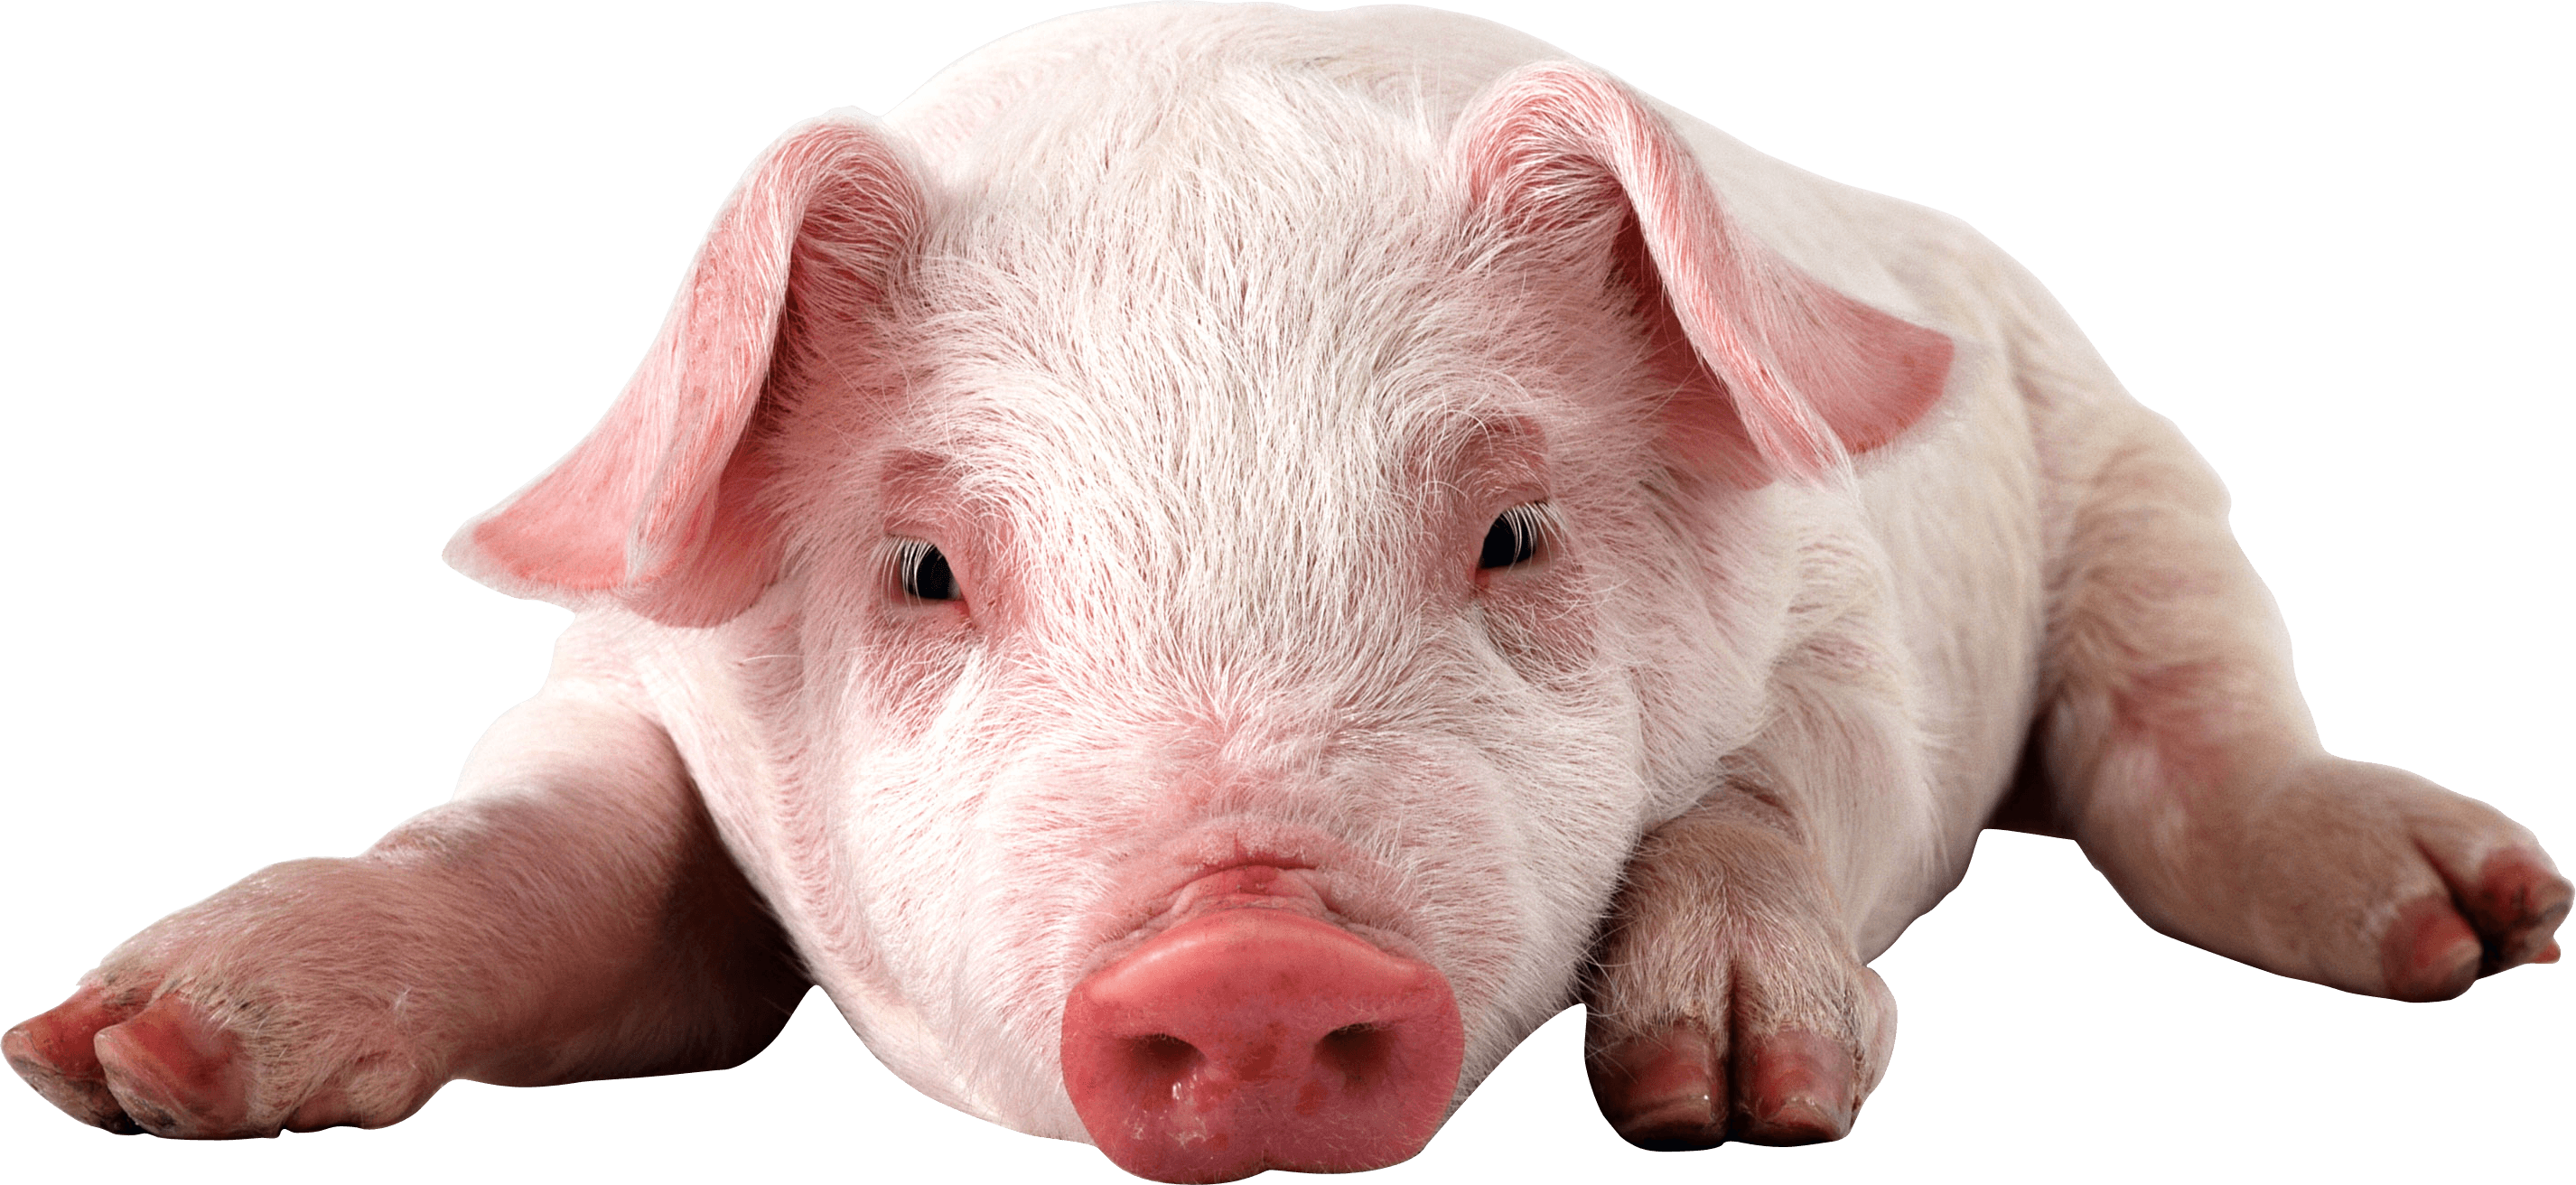 Pig PNG image, free picture download pigs